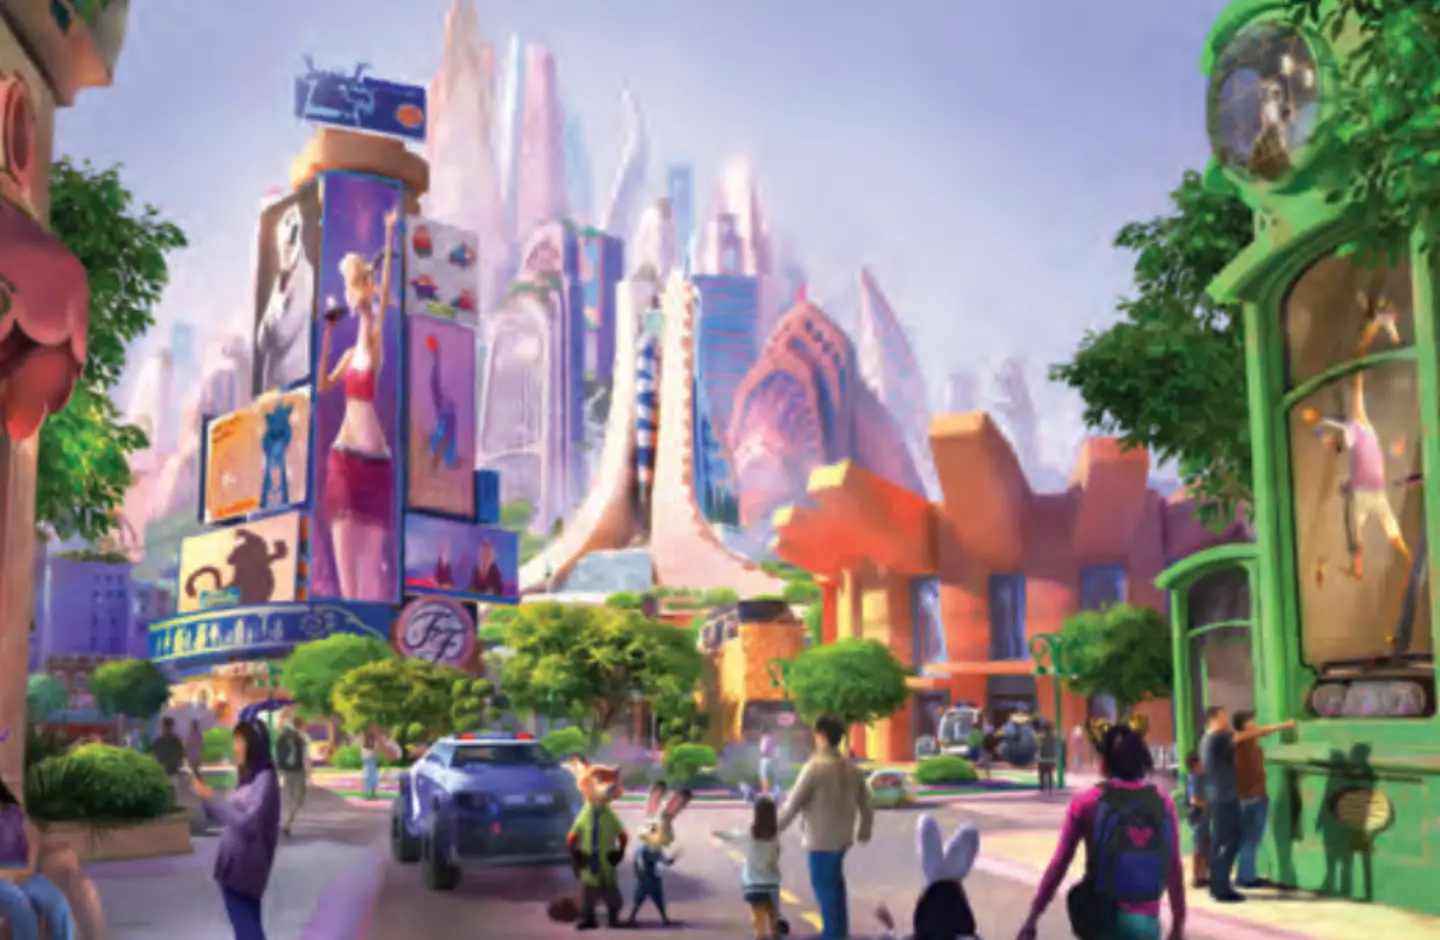 Zootopia is one of the movies which could be brought to life if the plans are approved.